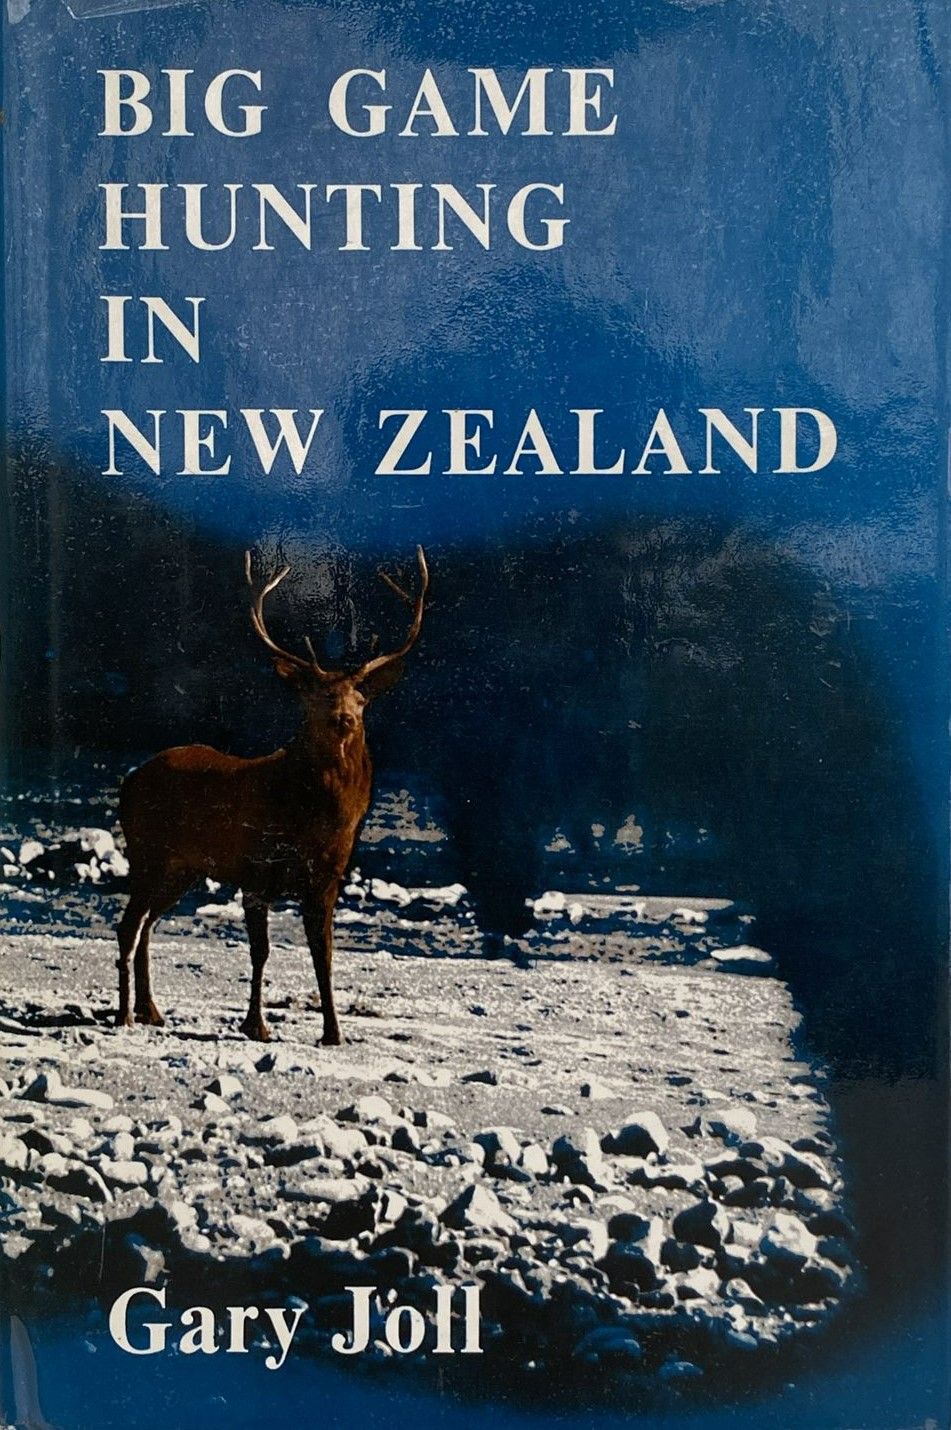 BIG GAME HUNTING IN NEW ZEALAND